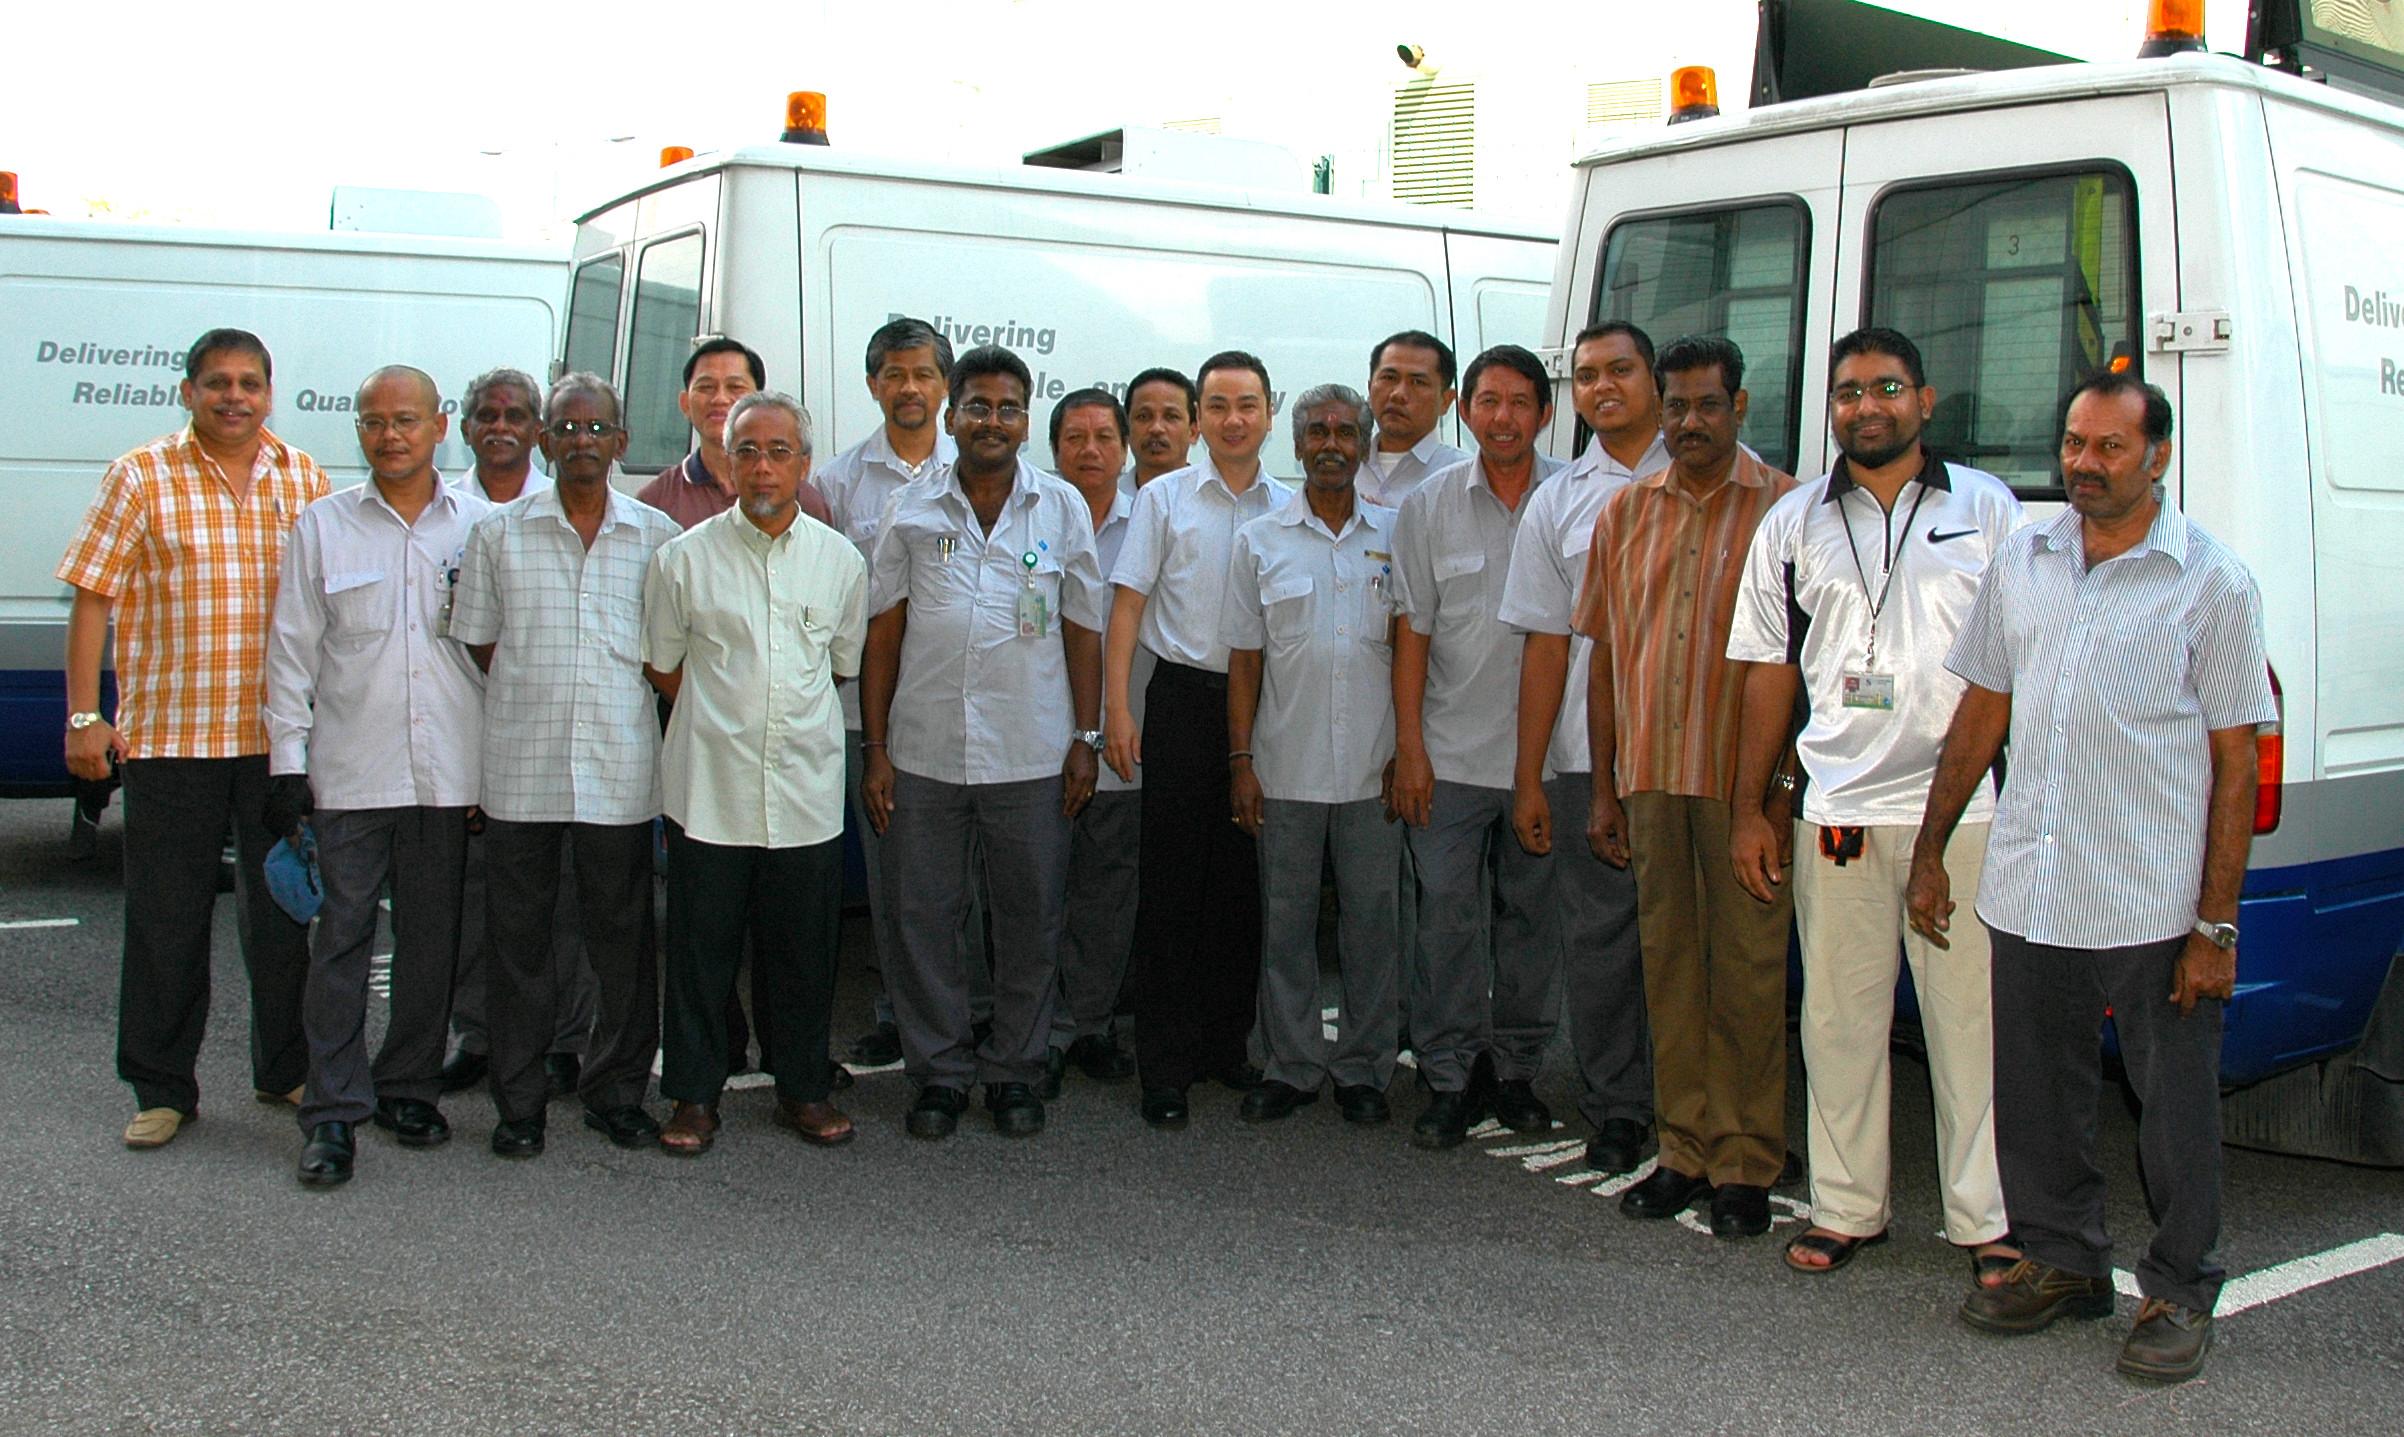 Seng Kok with the Electricity Service Centre crew when he was with the Distribution Control & Customer Service section in 2008.